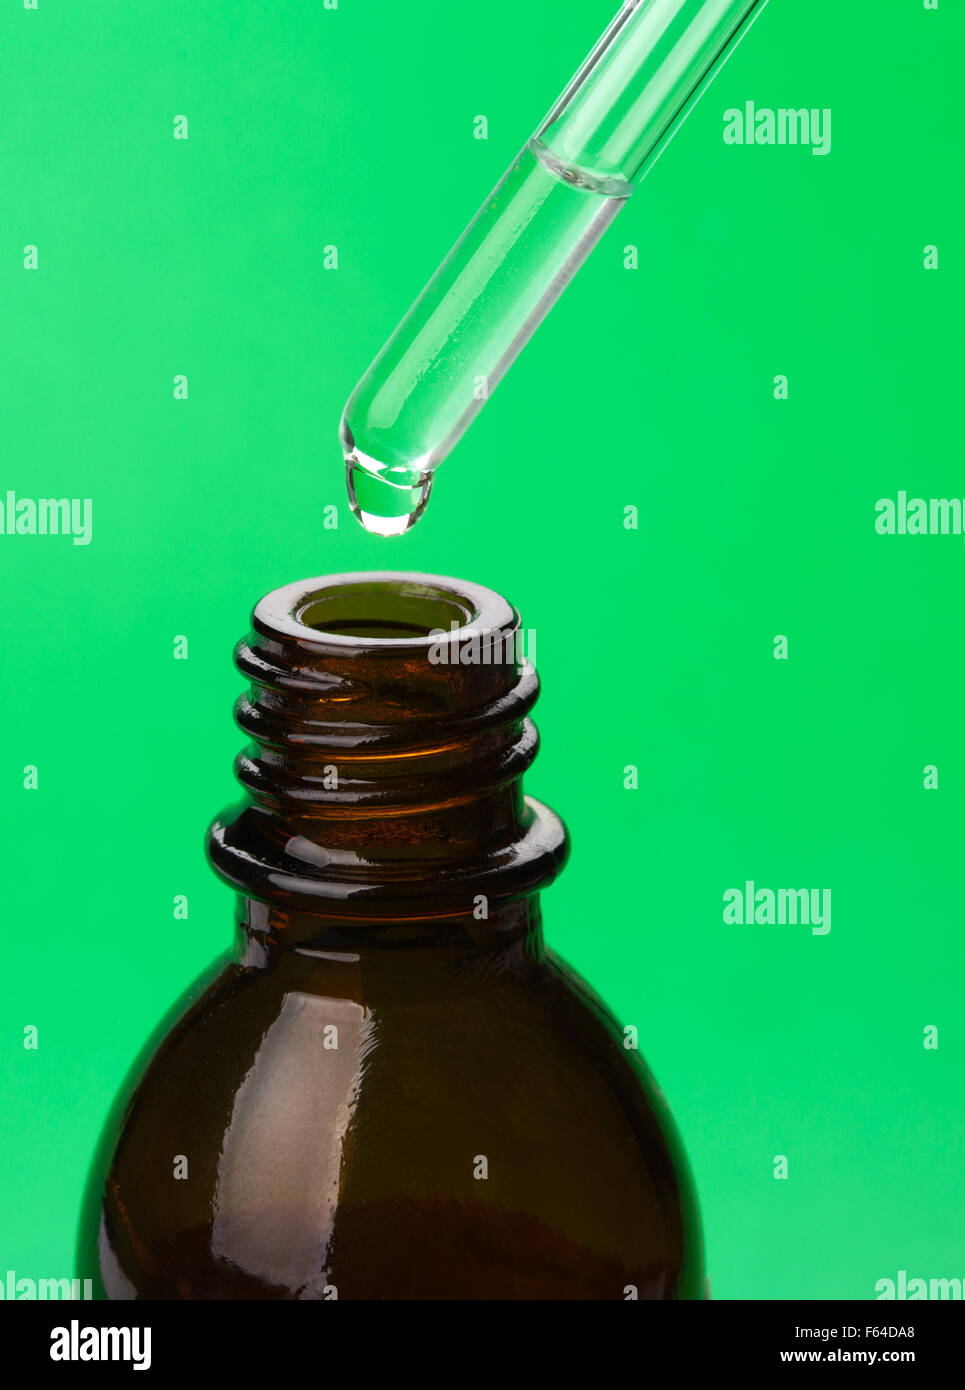 Pouring medical drops into a brown glass bottle Stock Photo